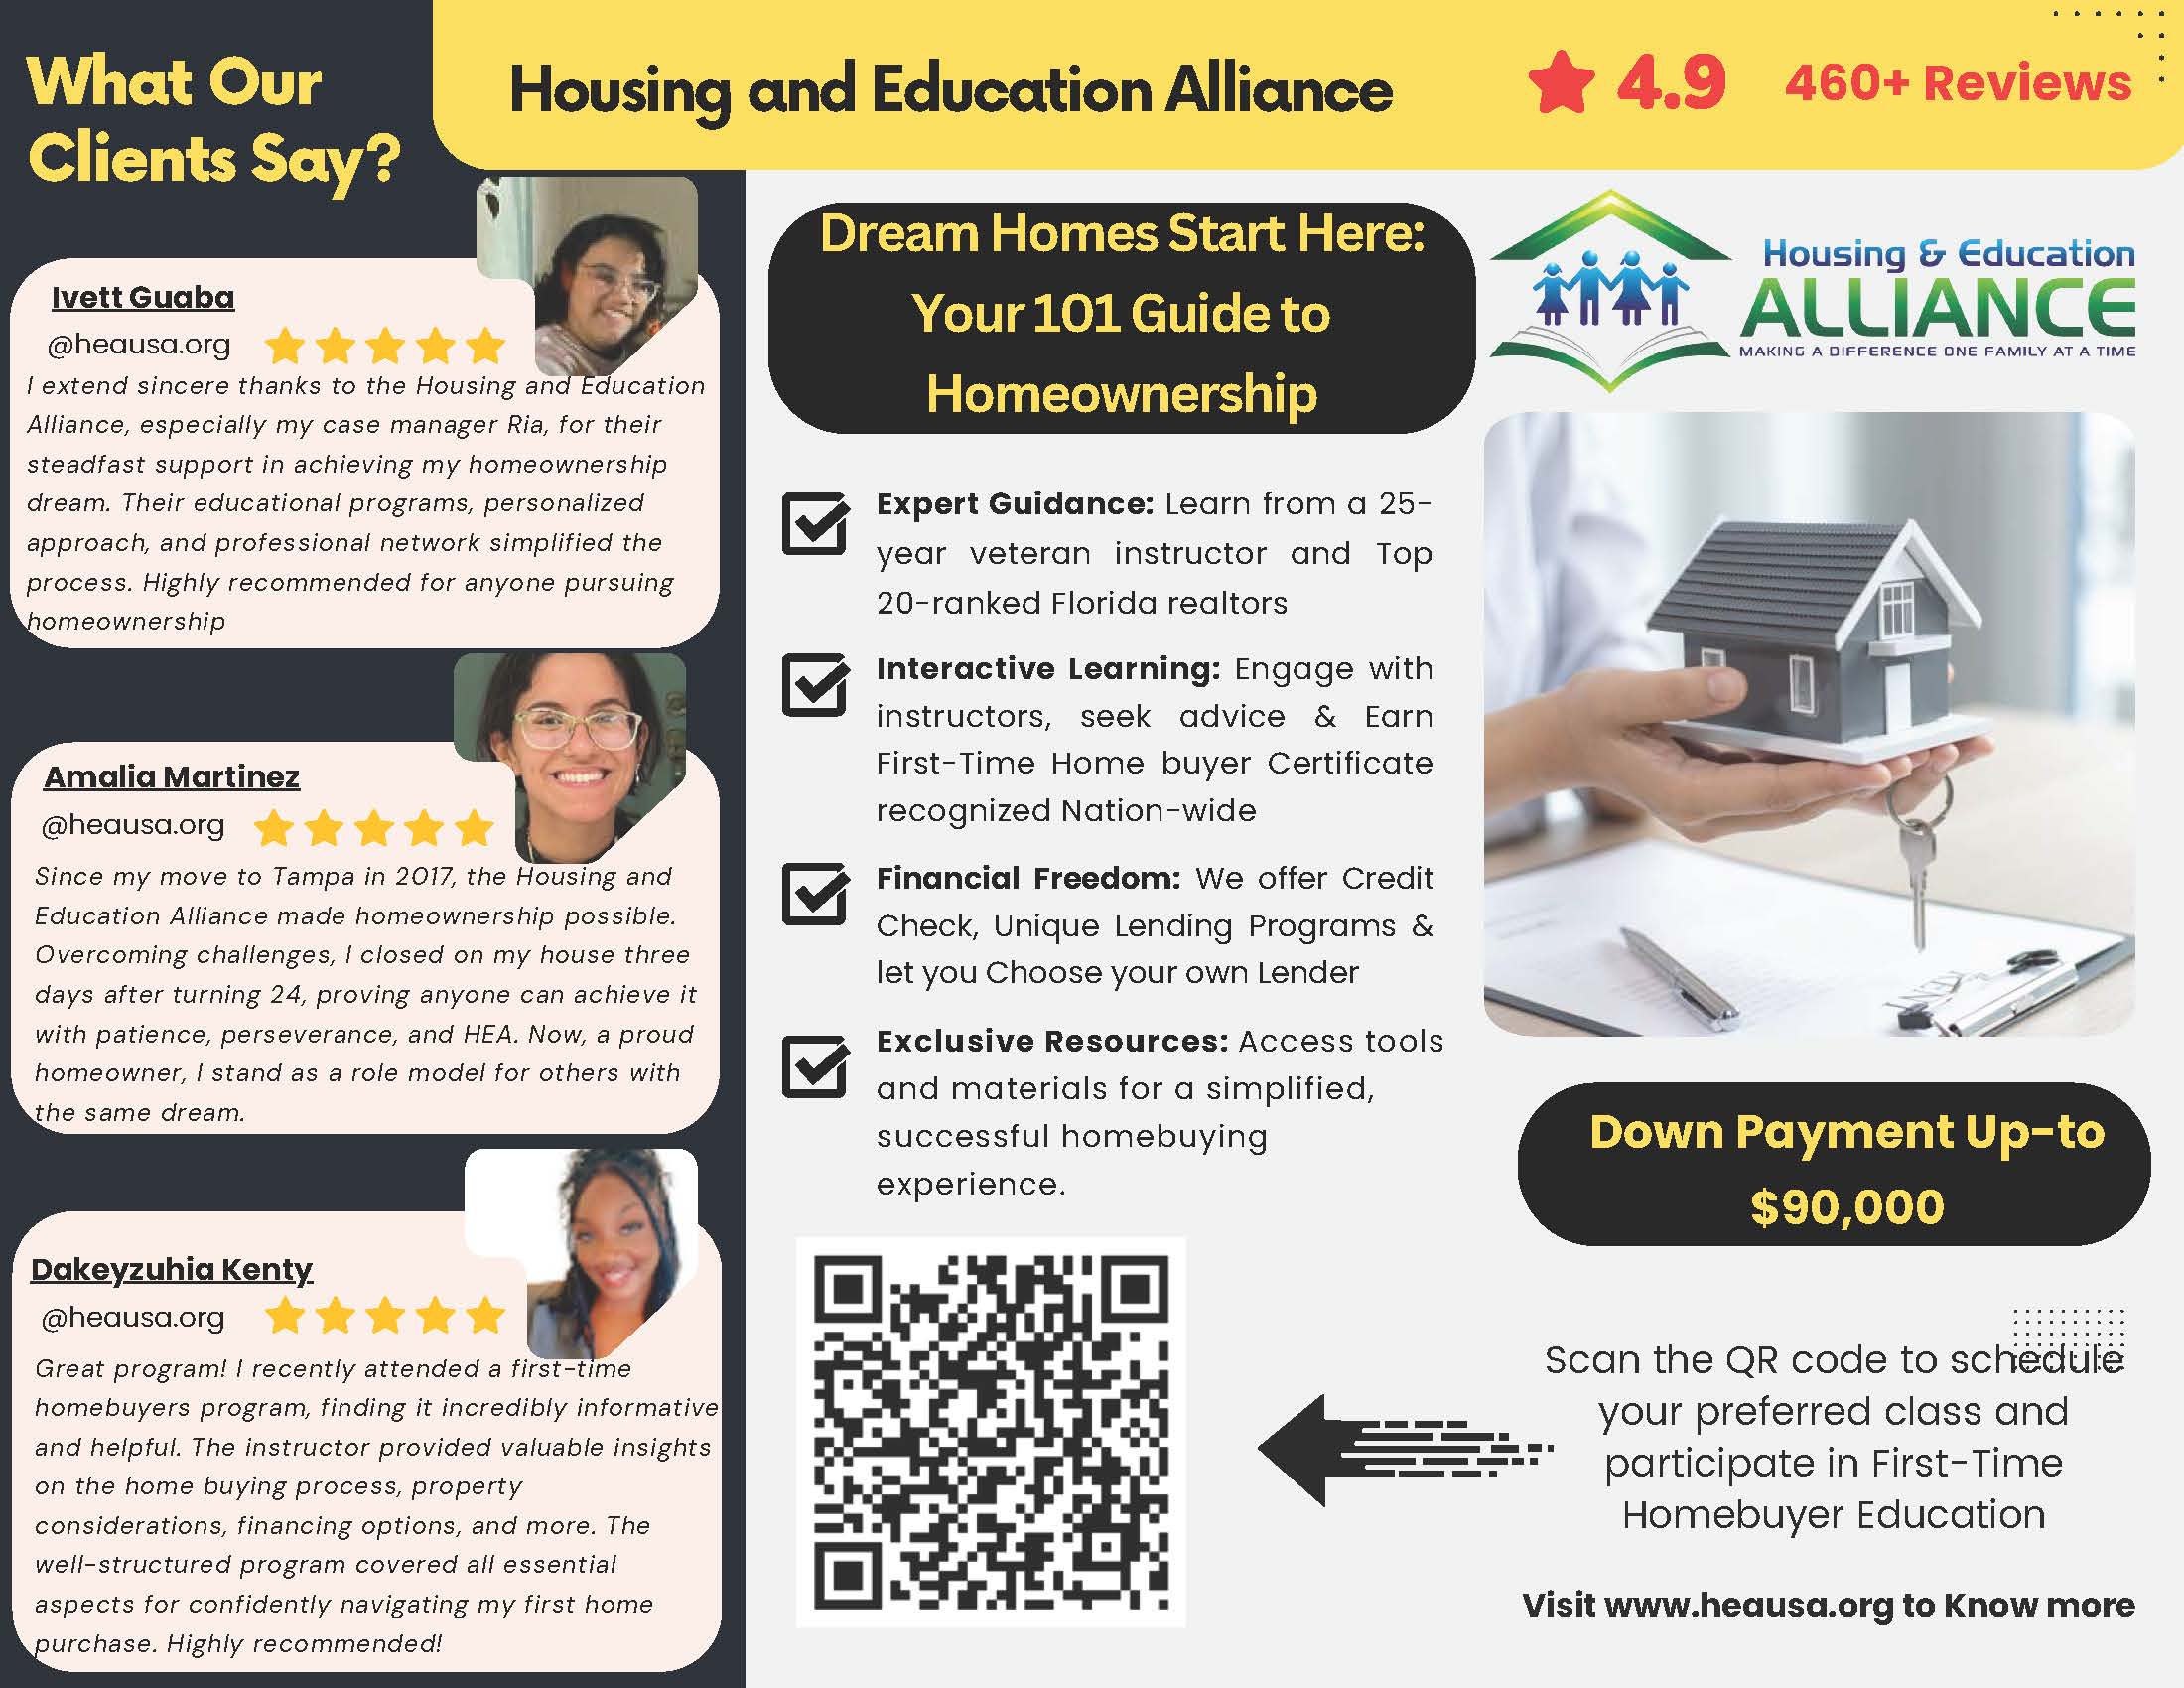 Housing and education alliance